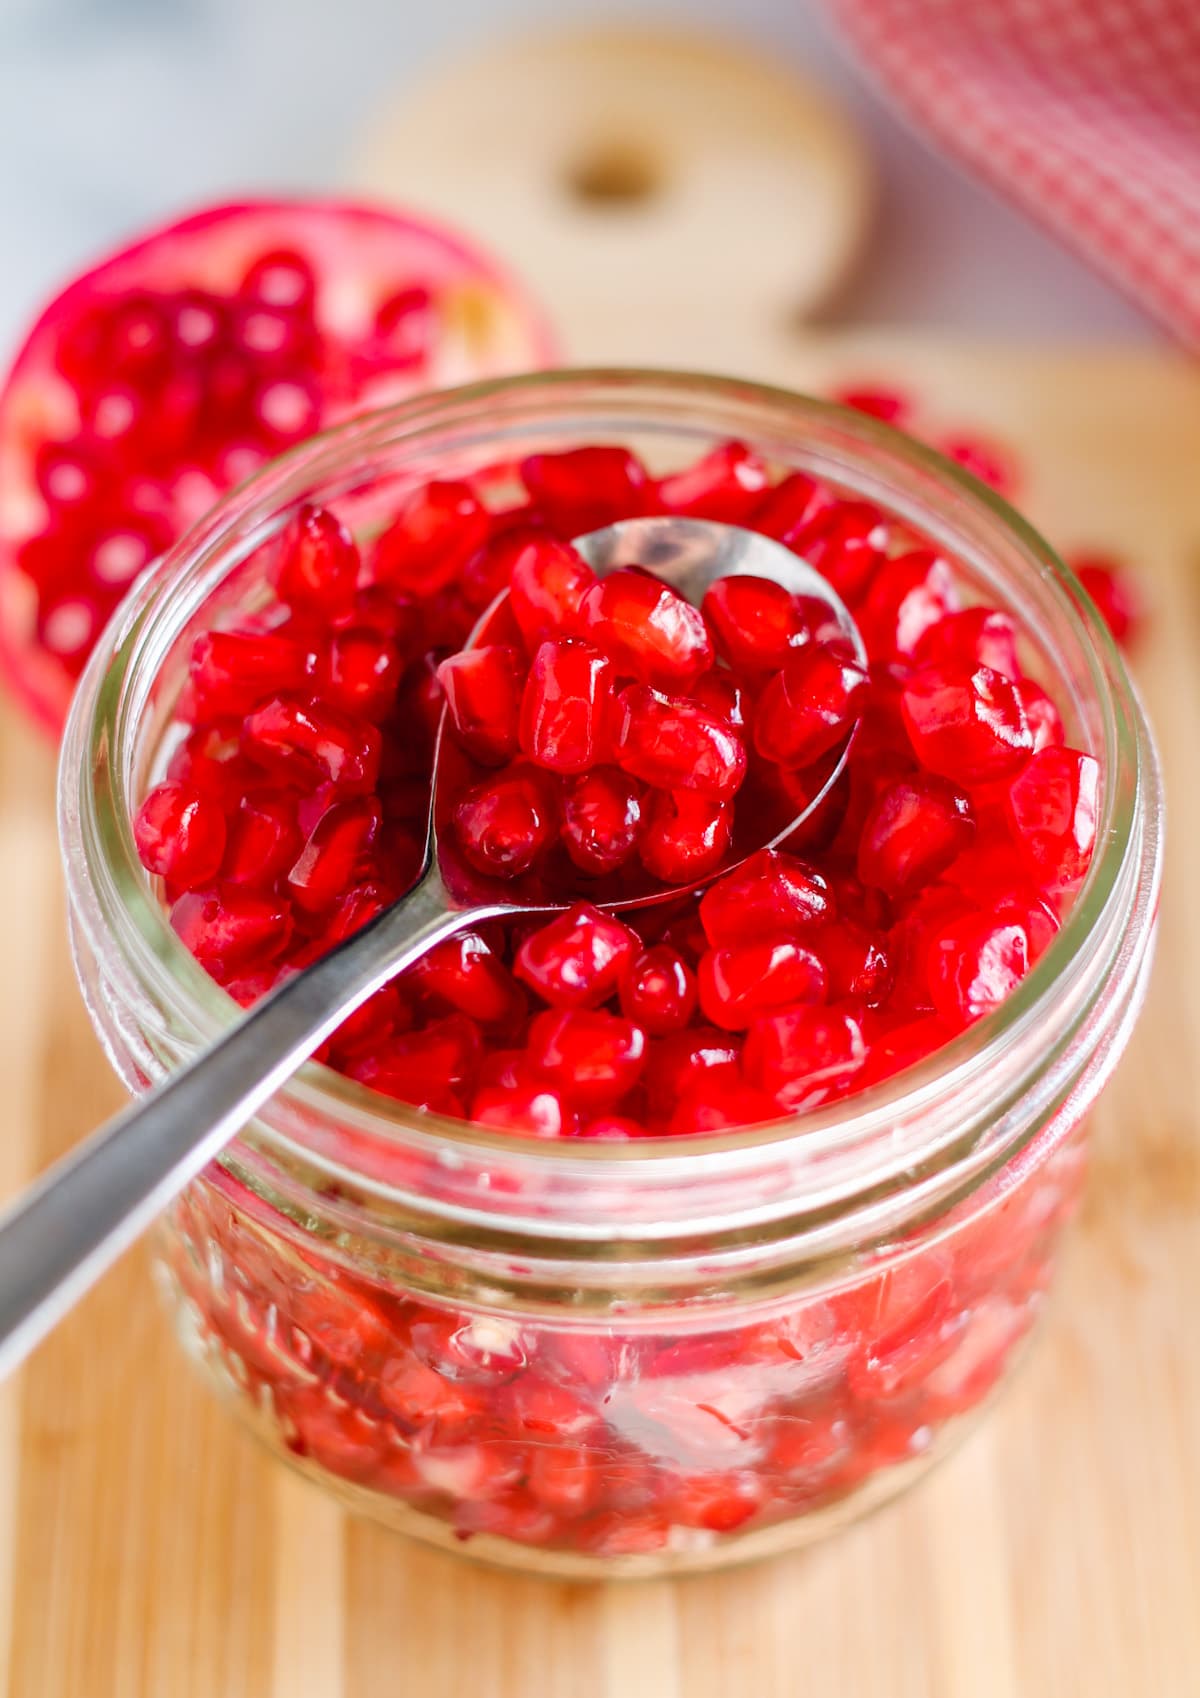 A spoon of pomegranate seeds.